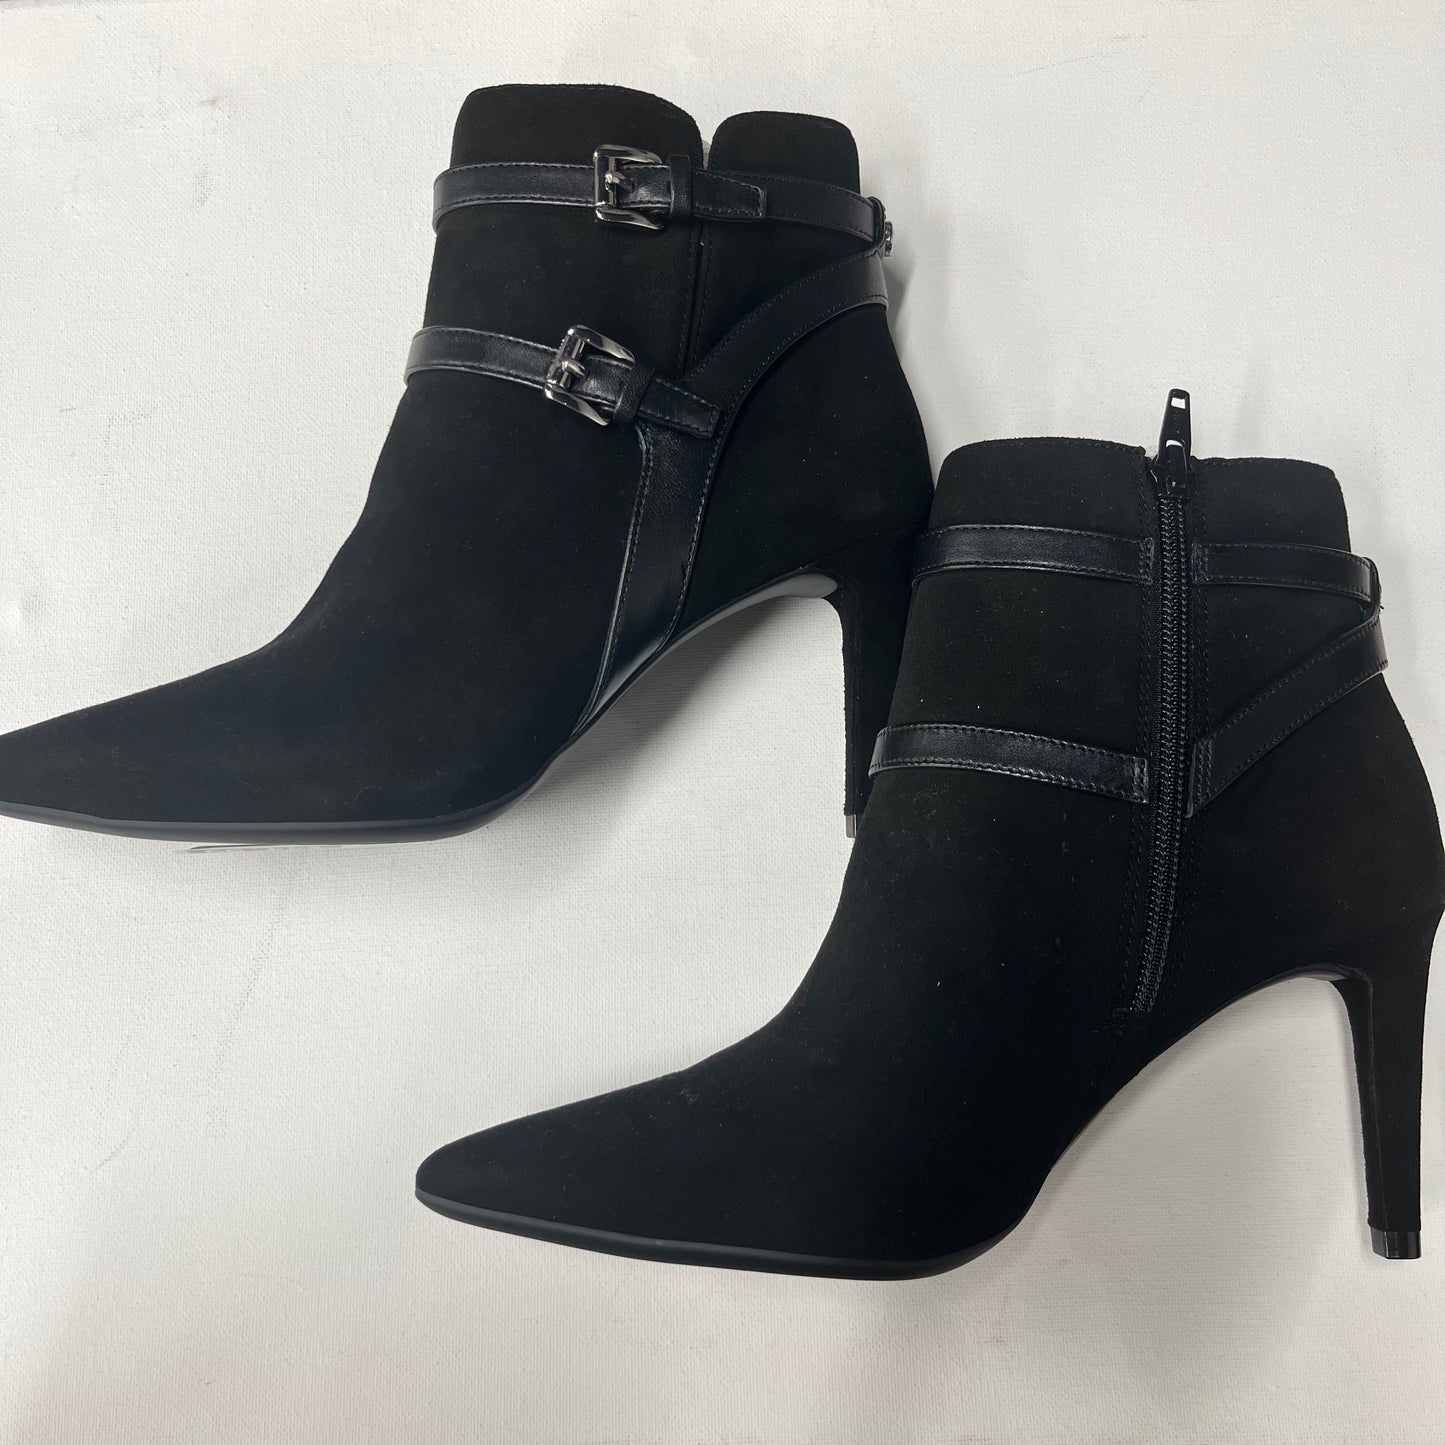 Boots Ankle Heels By Michael Kors  Size: 6.5